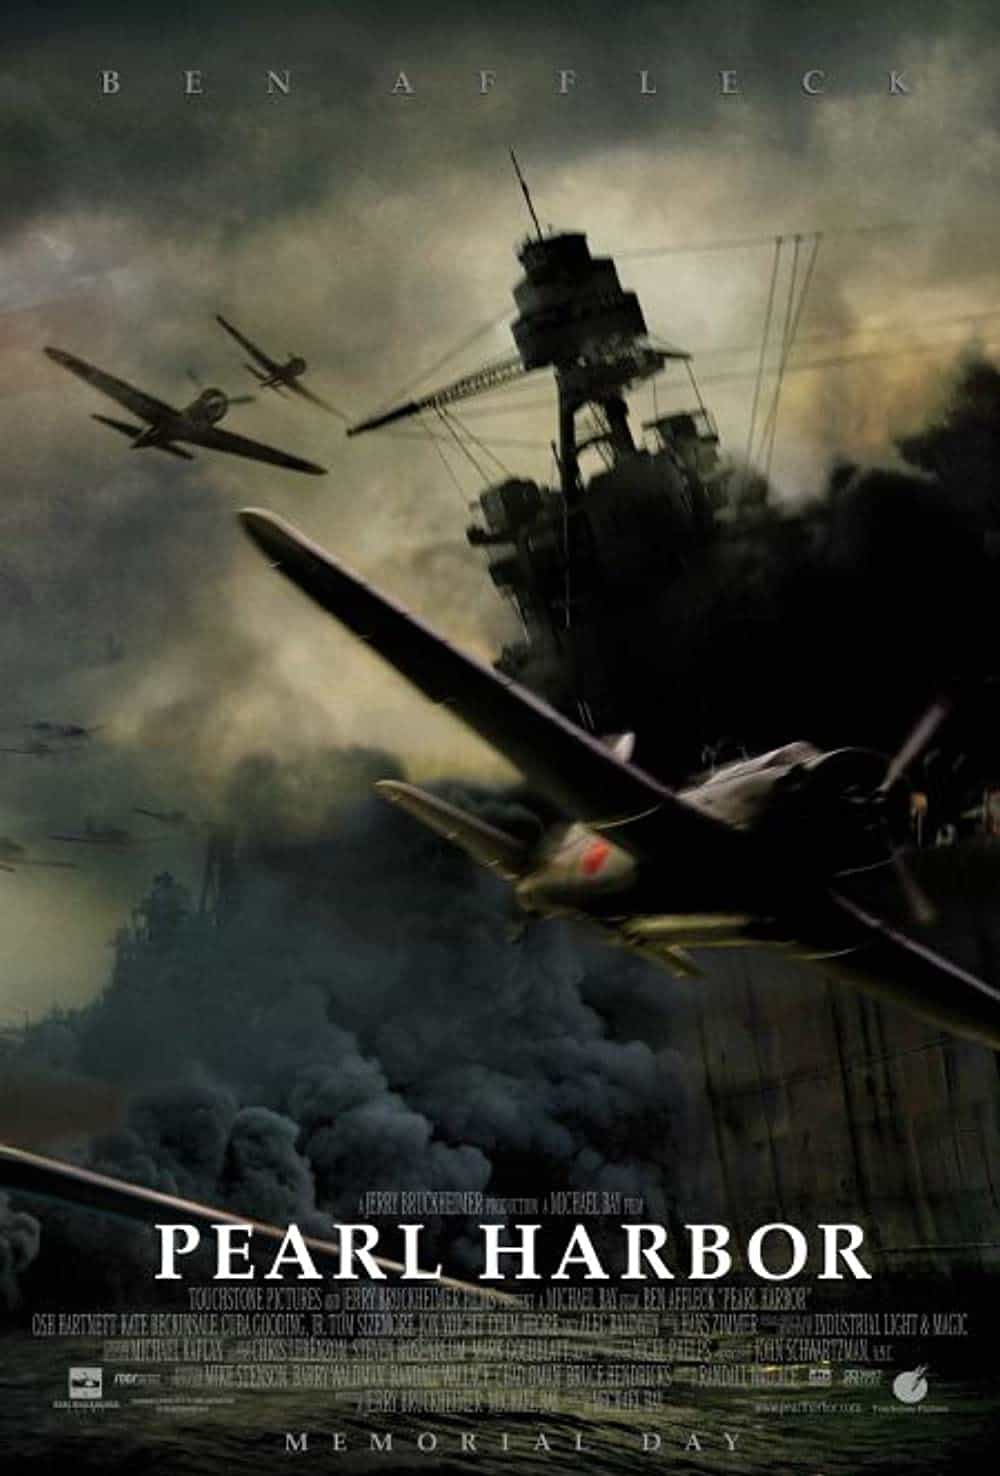 Pearl Harbor (May 21, 2001) 13 Best Pearl Harbor Movies You Can't Miss